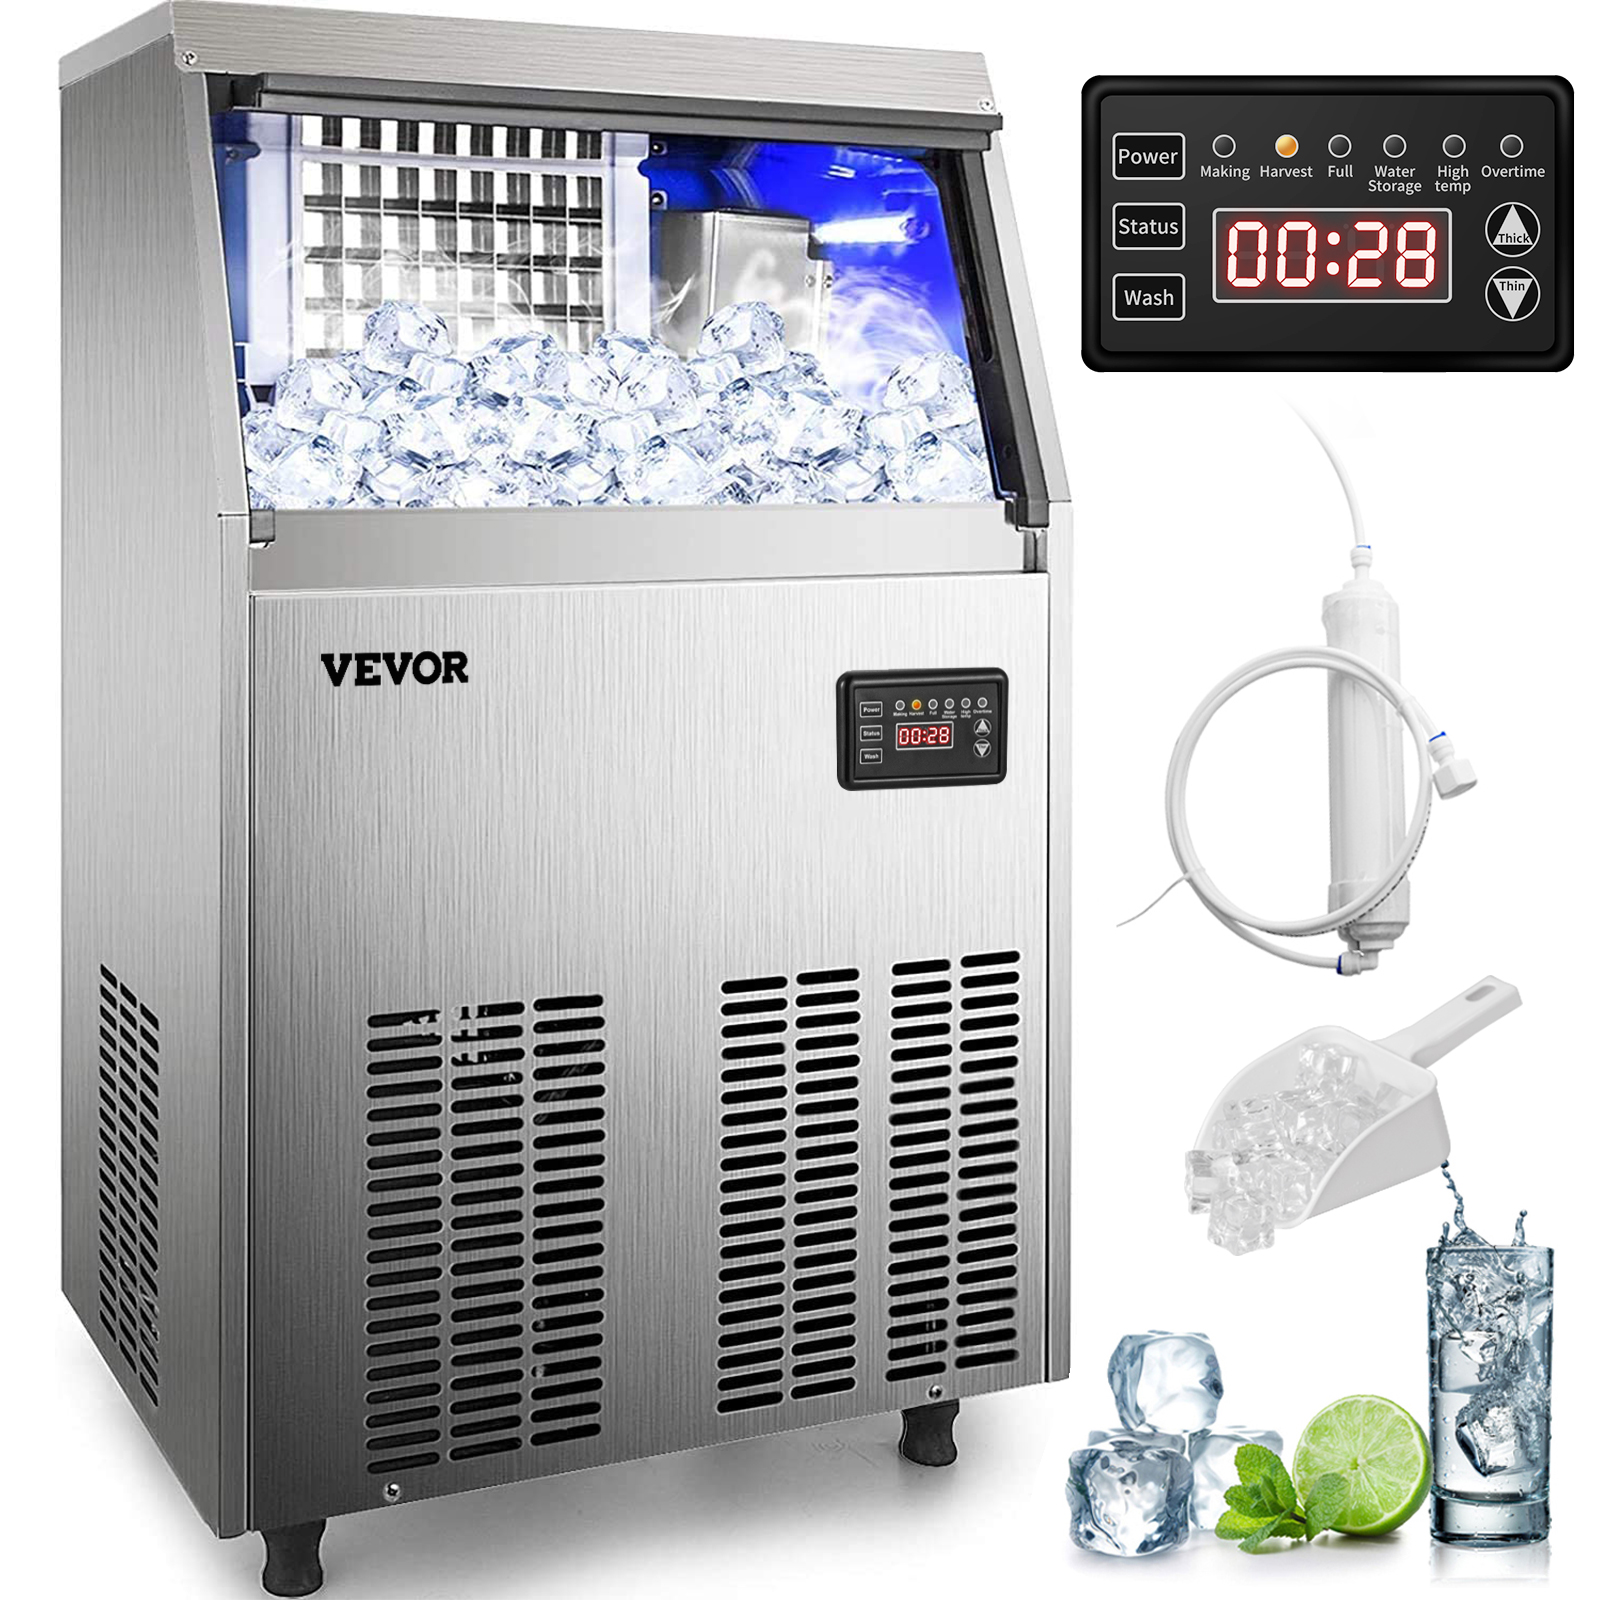 VEVOR 110V Portable Ice Maker Countertop 40 LBS in 24 Hours, Ice